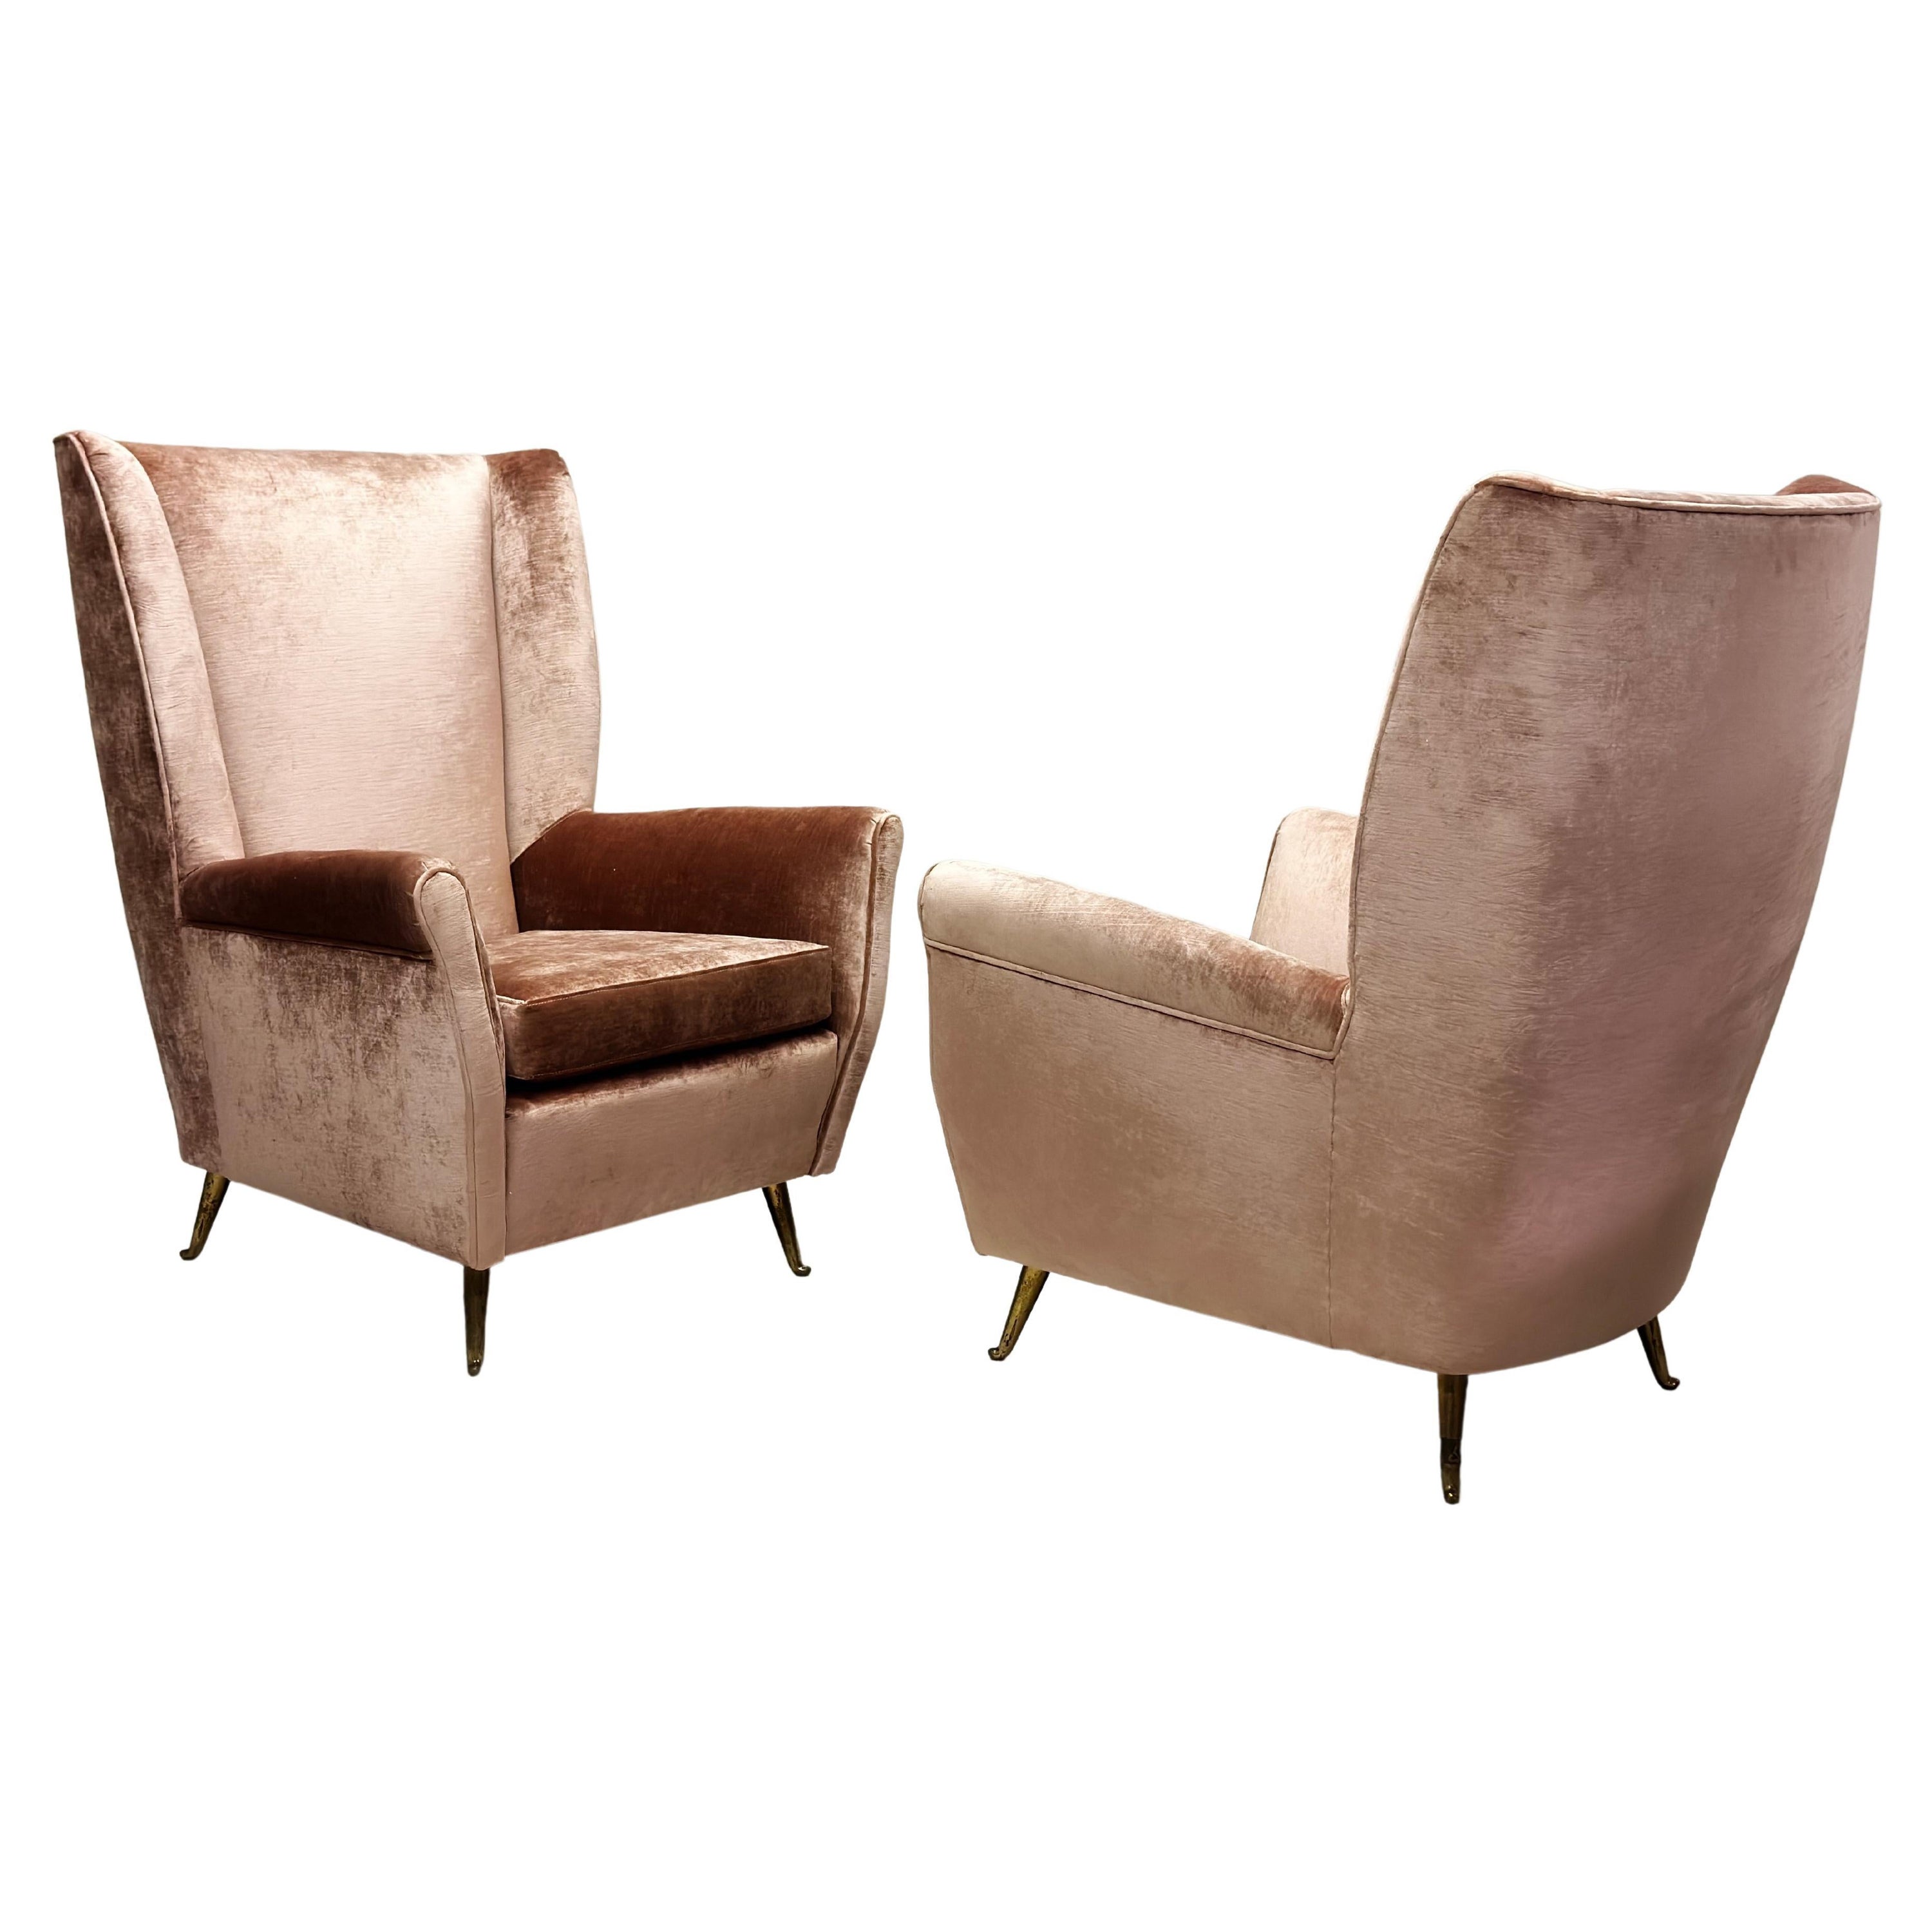 Pair of Italian Mid-Century Wingback Lounge Chairs by Isa Bergamo For Sale